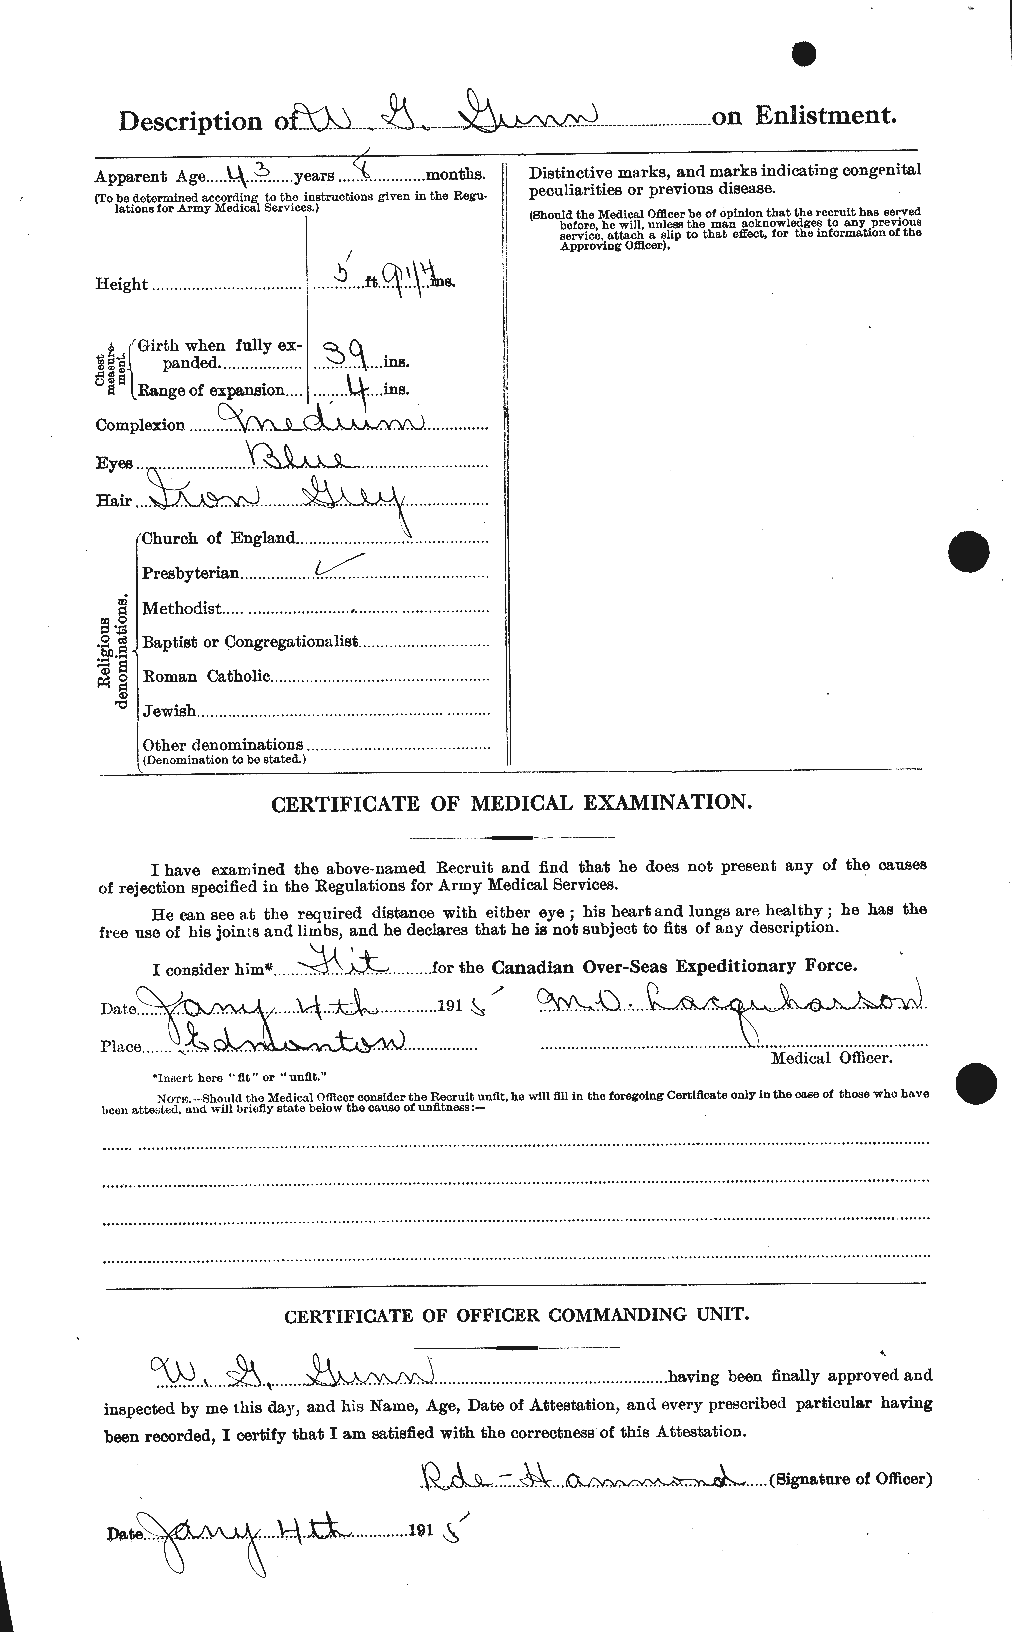 Personnel Records of the First World War - CEF 369368b